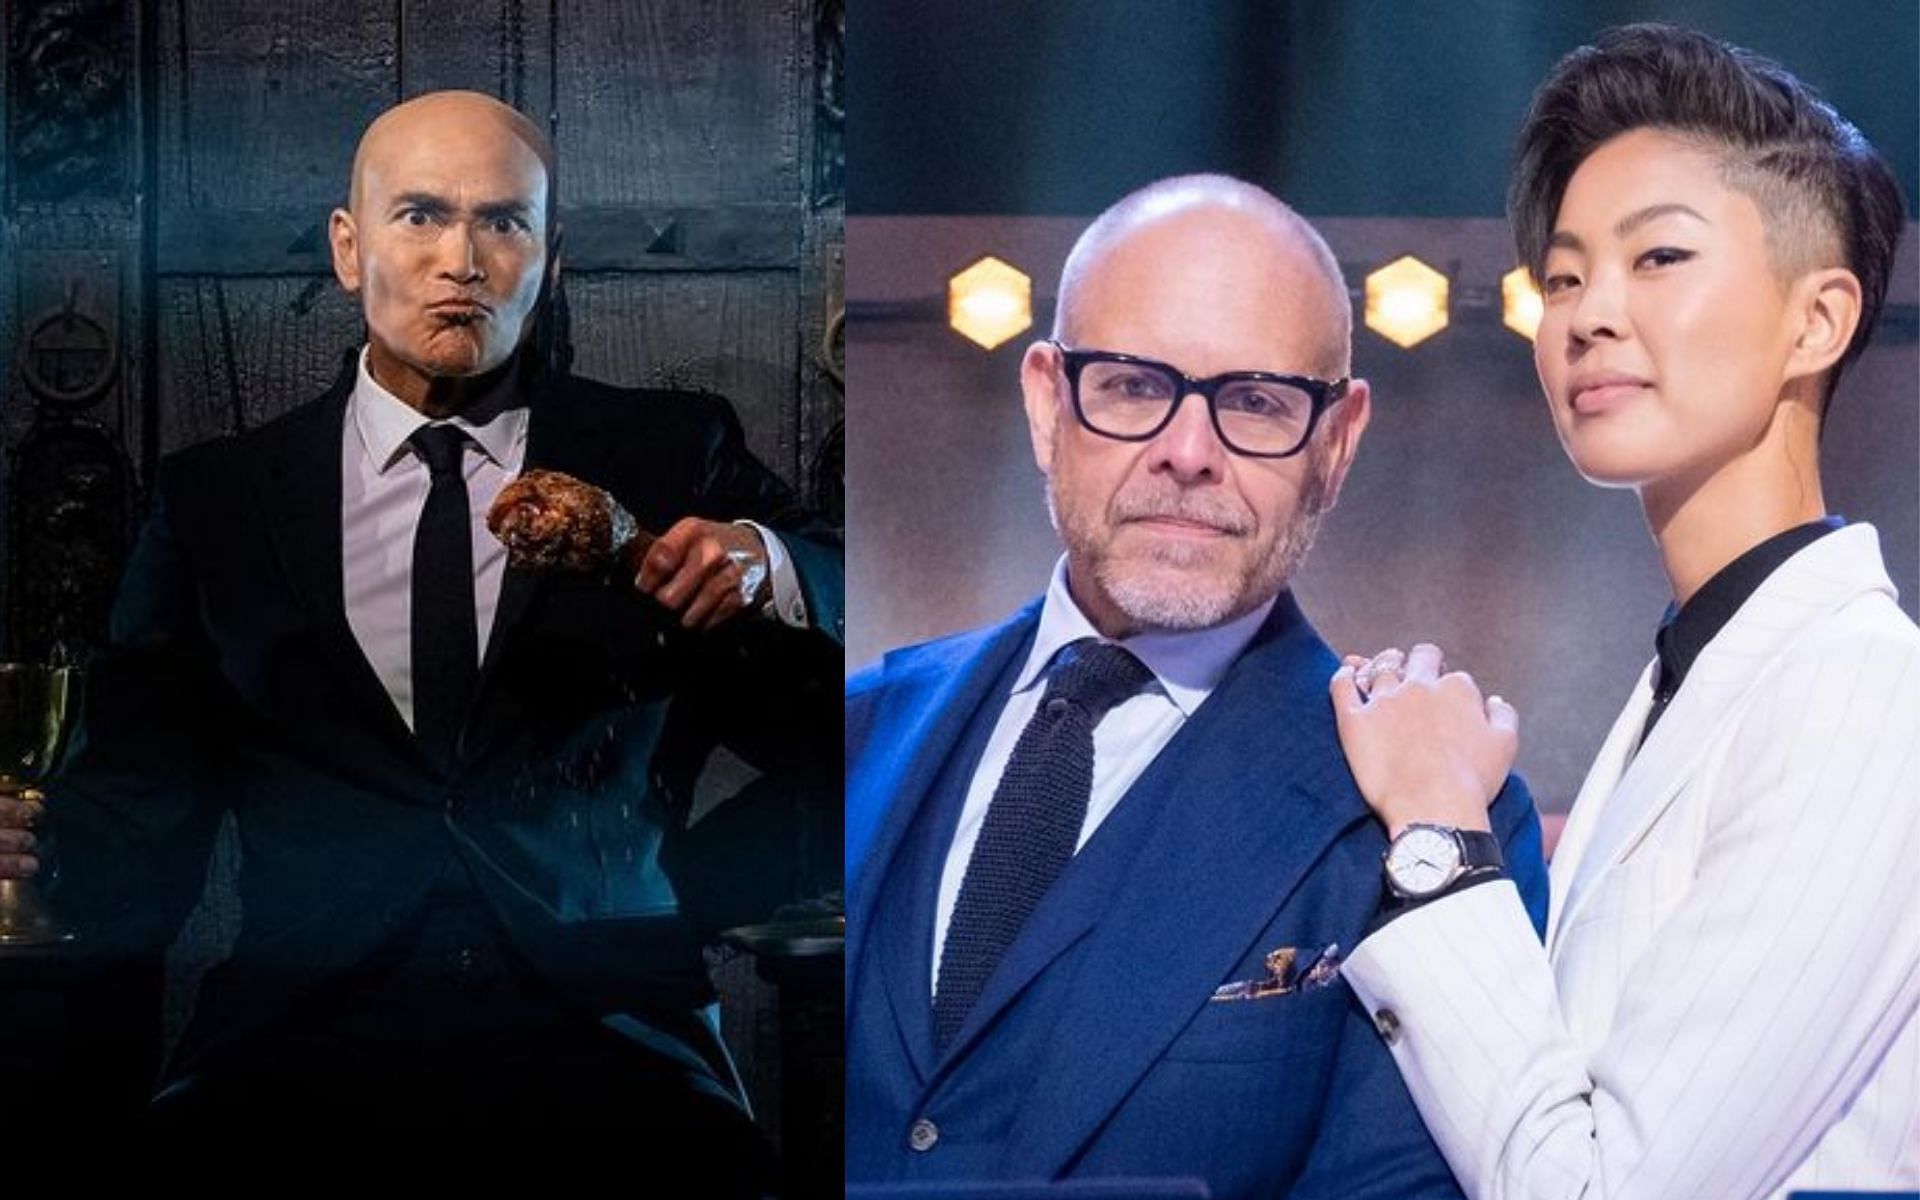 Alton Brown and Kristen Kish will host Iron Chef: Quest for an Iron Legend Season 1 with Mark Dacascos as The Chairman (Images via kristenlkish and dacascosmark/ Instagram)